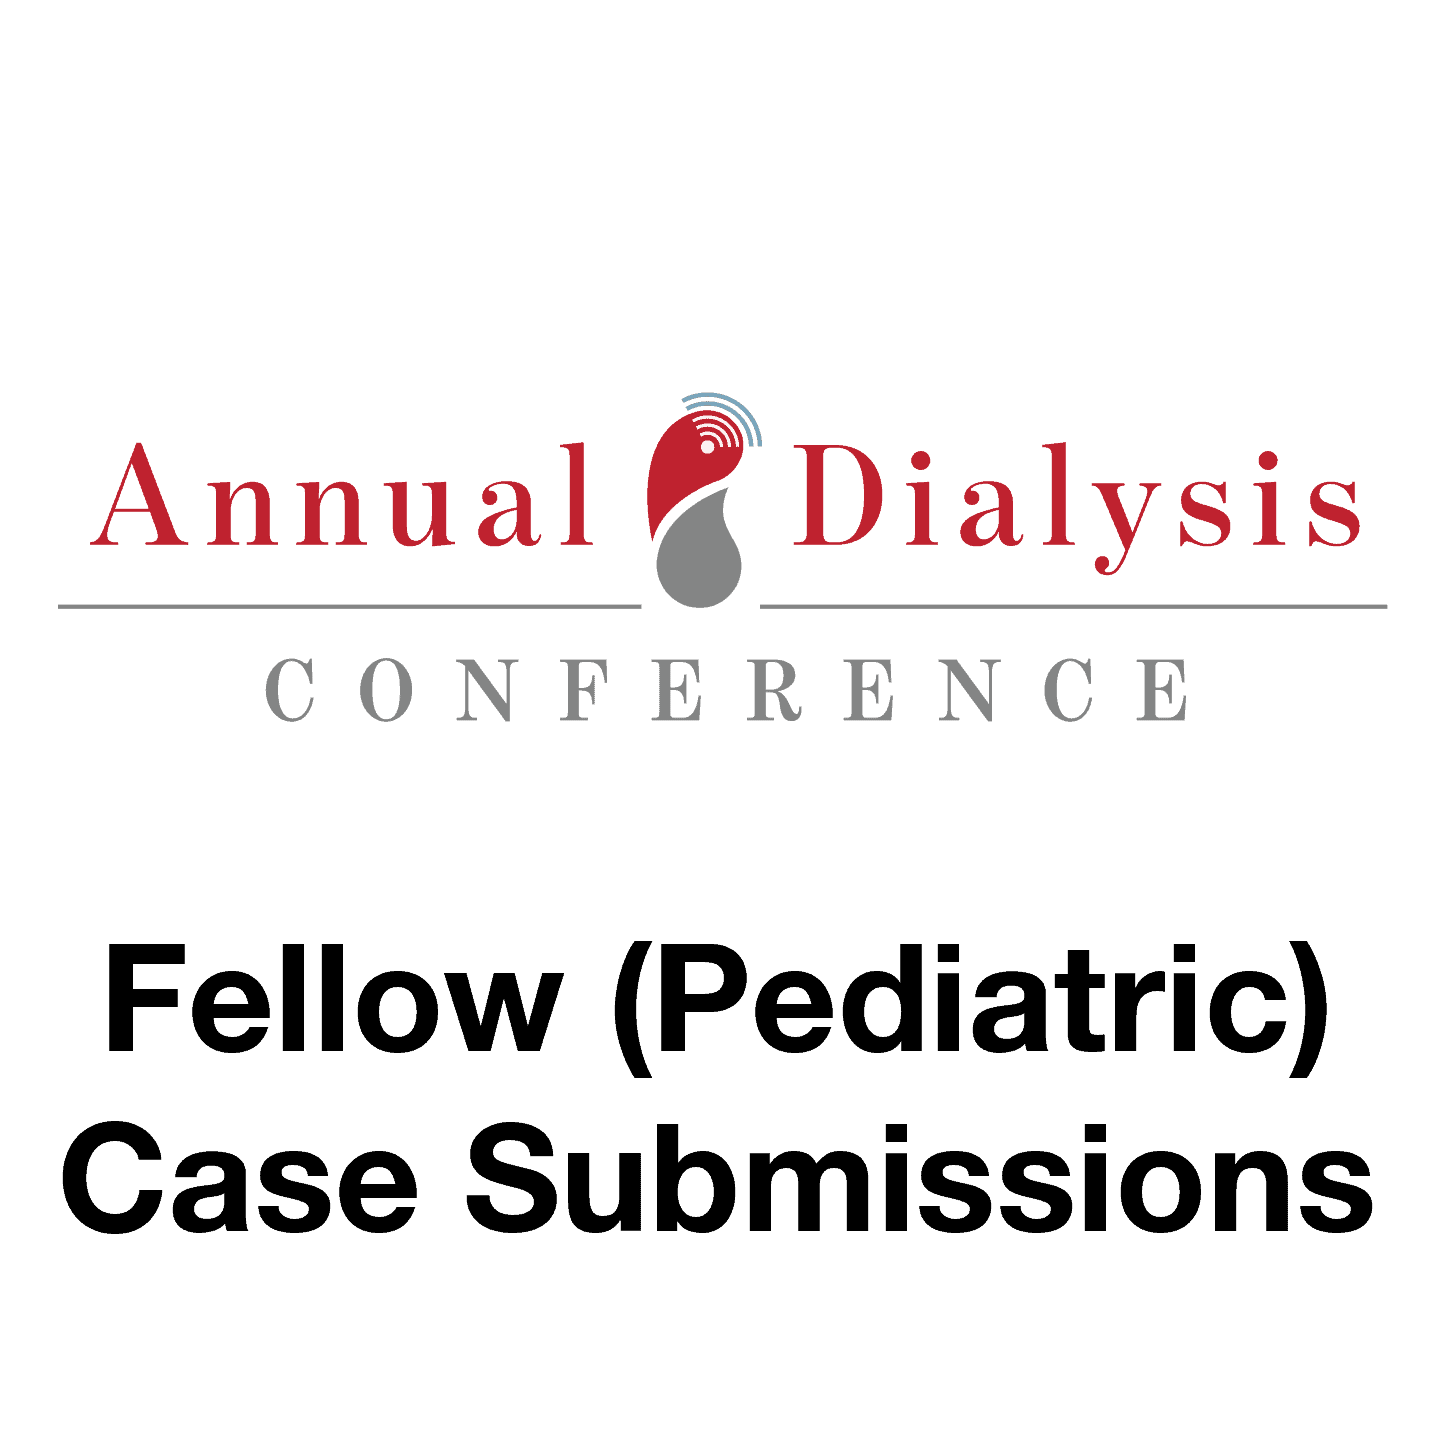 Fellow (Pediatric) Case Submissions